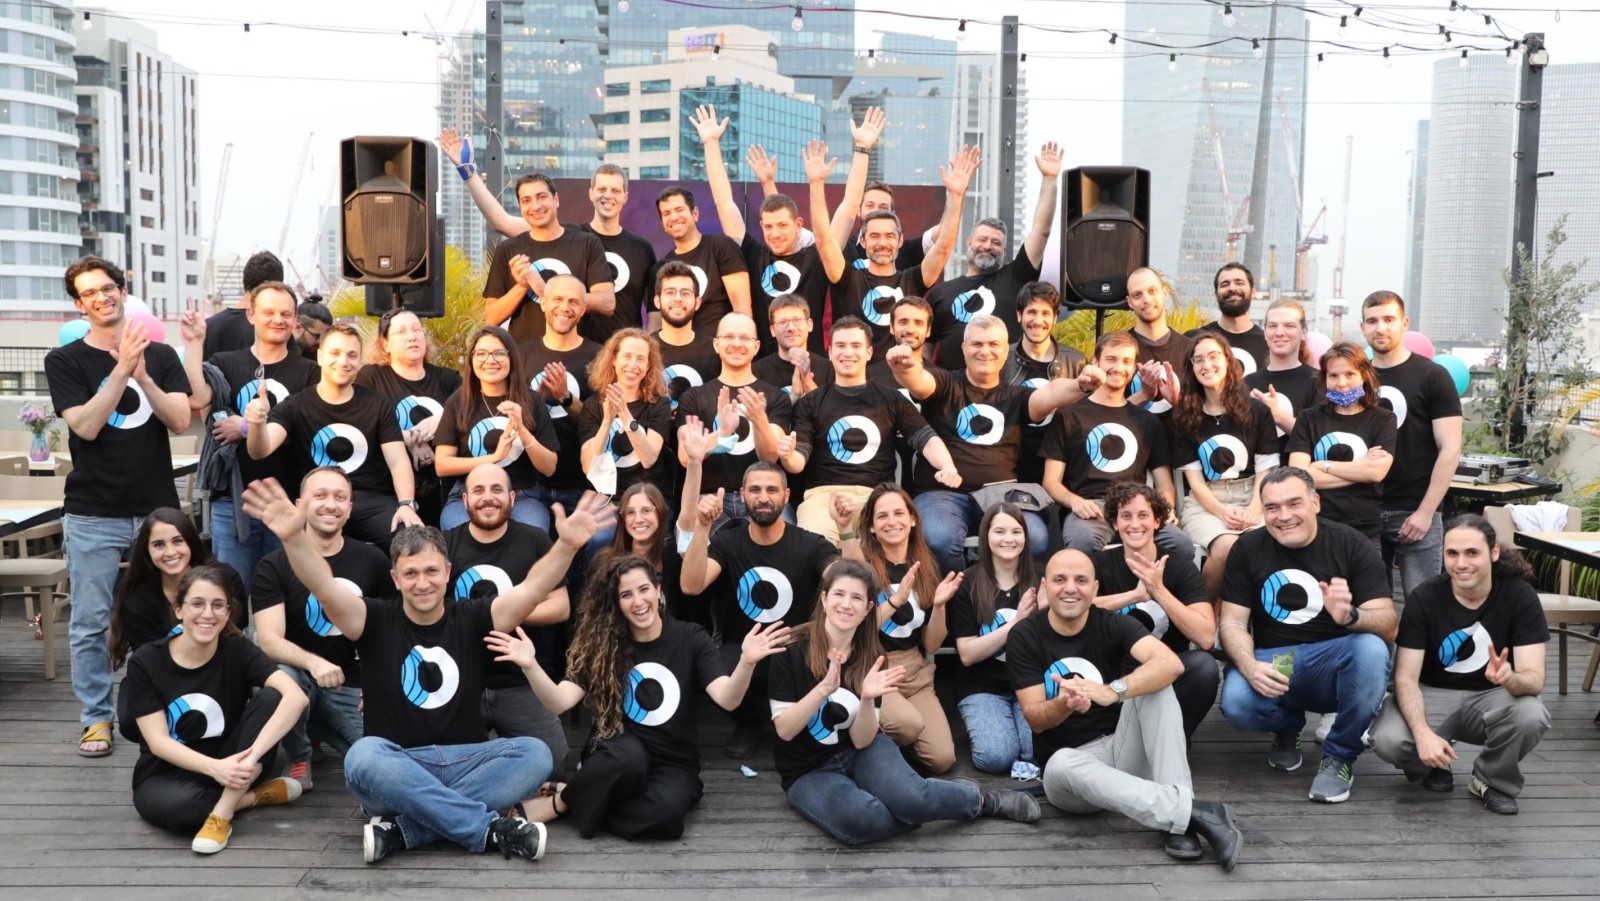 Orca Security celebrates its $210 million funding round, March 2021. Photo courtesy of Orca Security